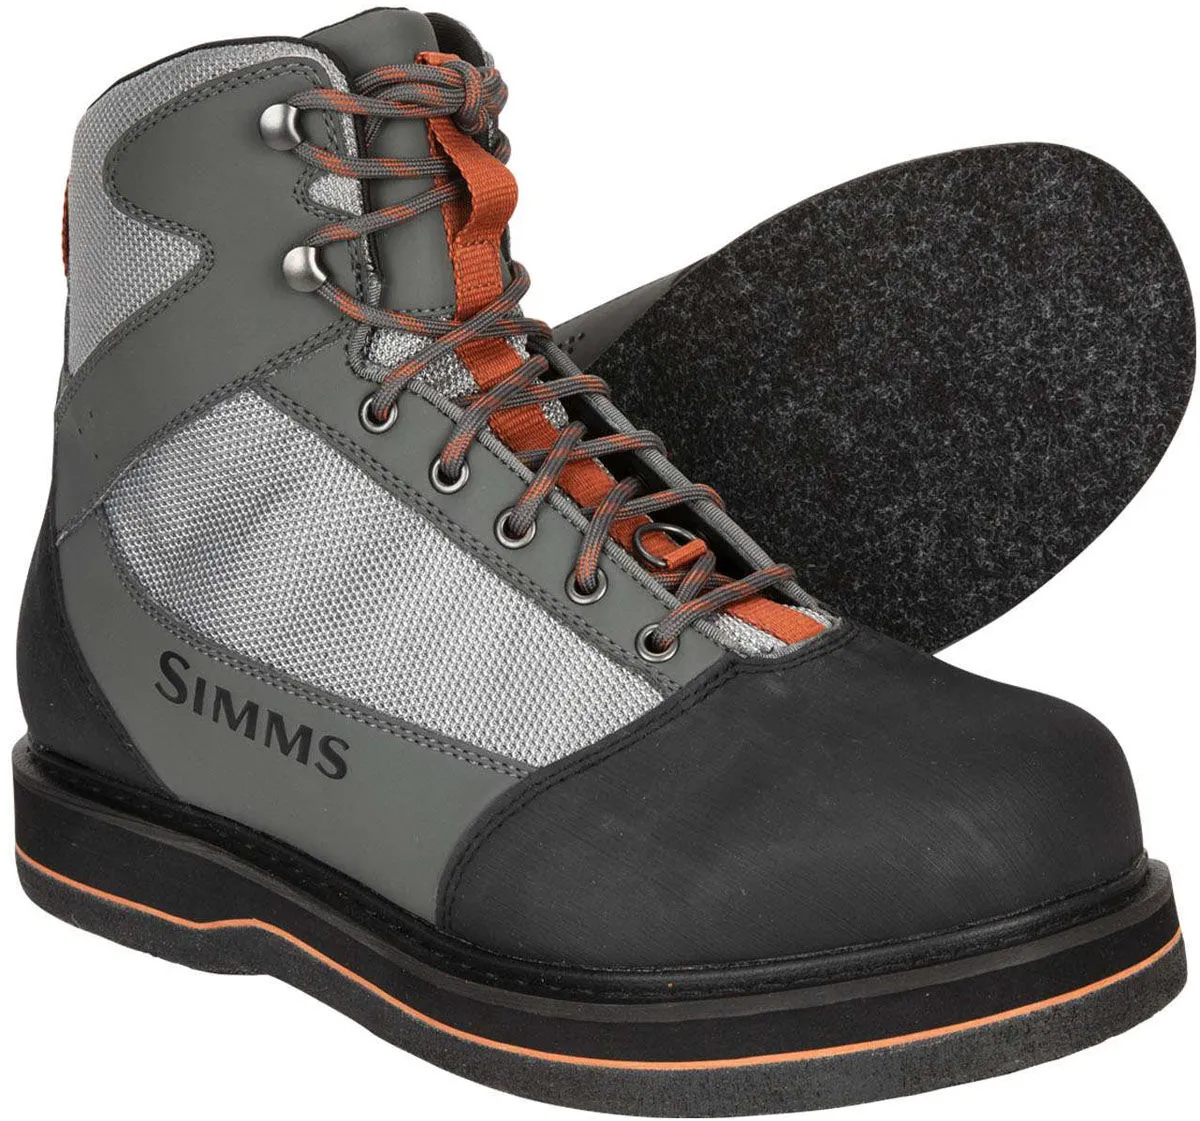 CLEARANCE SALE! - Simms Tributary Wading Boots - Vibram - SAVE 30%